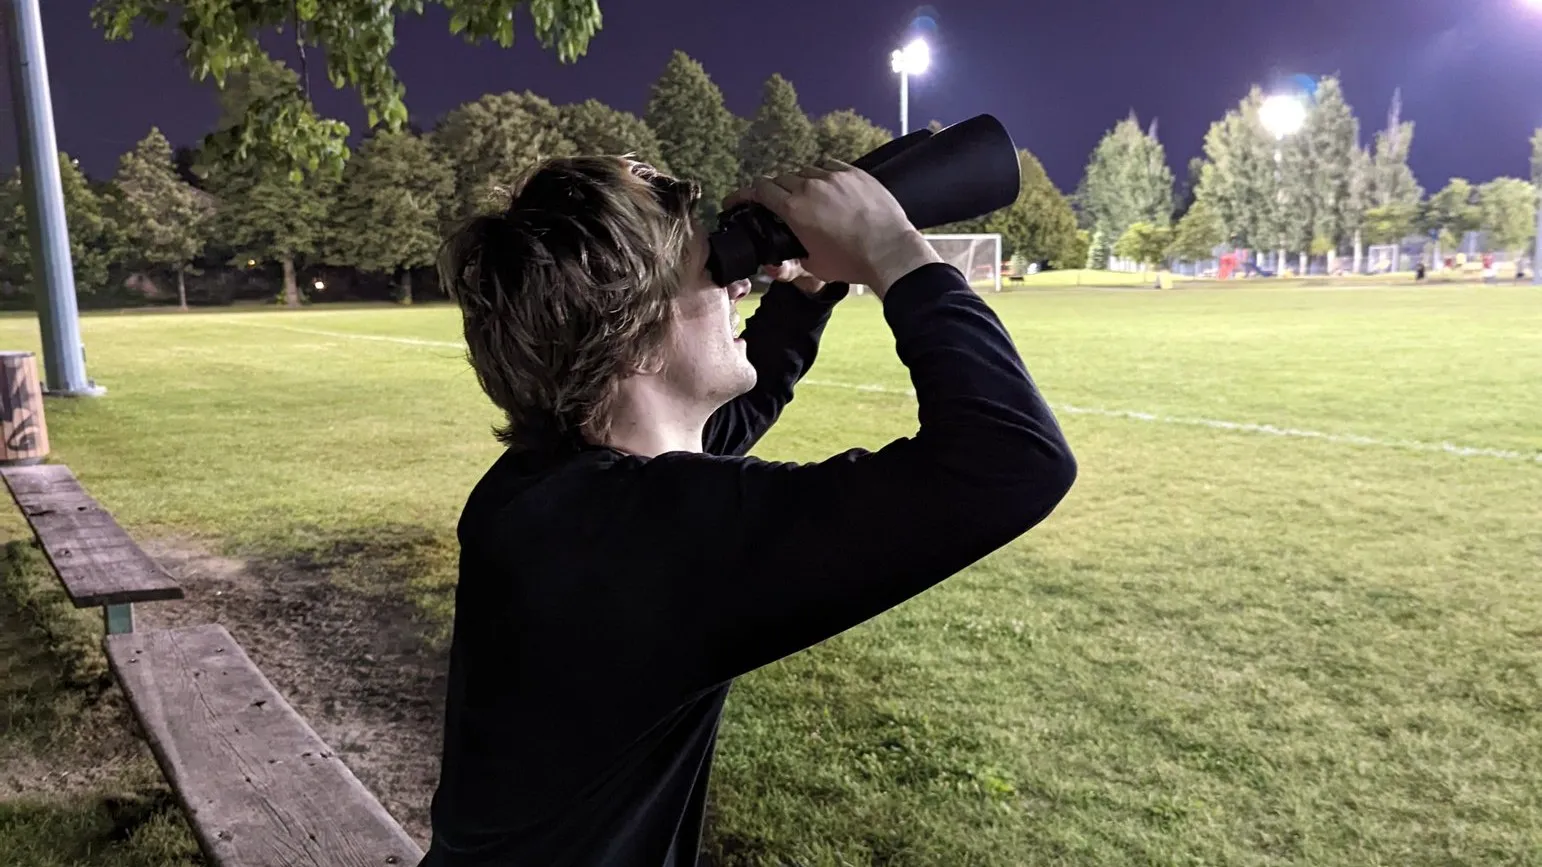 xQc using a pair of binoculars and looking into the sky, from a Tweet where he said "looking for who asked"